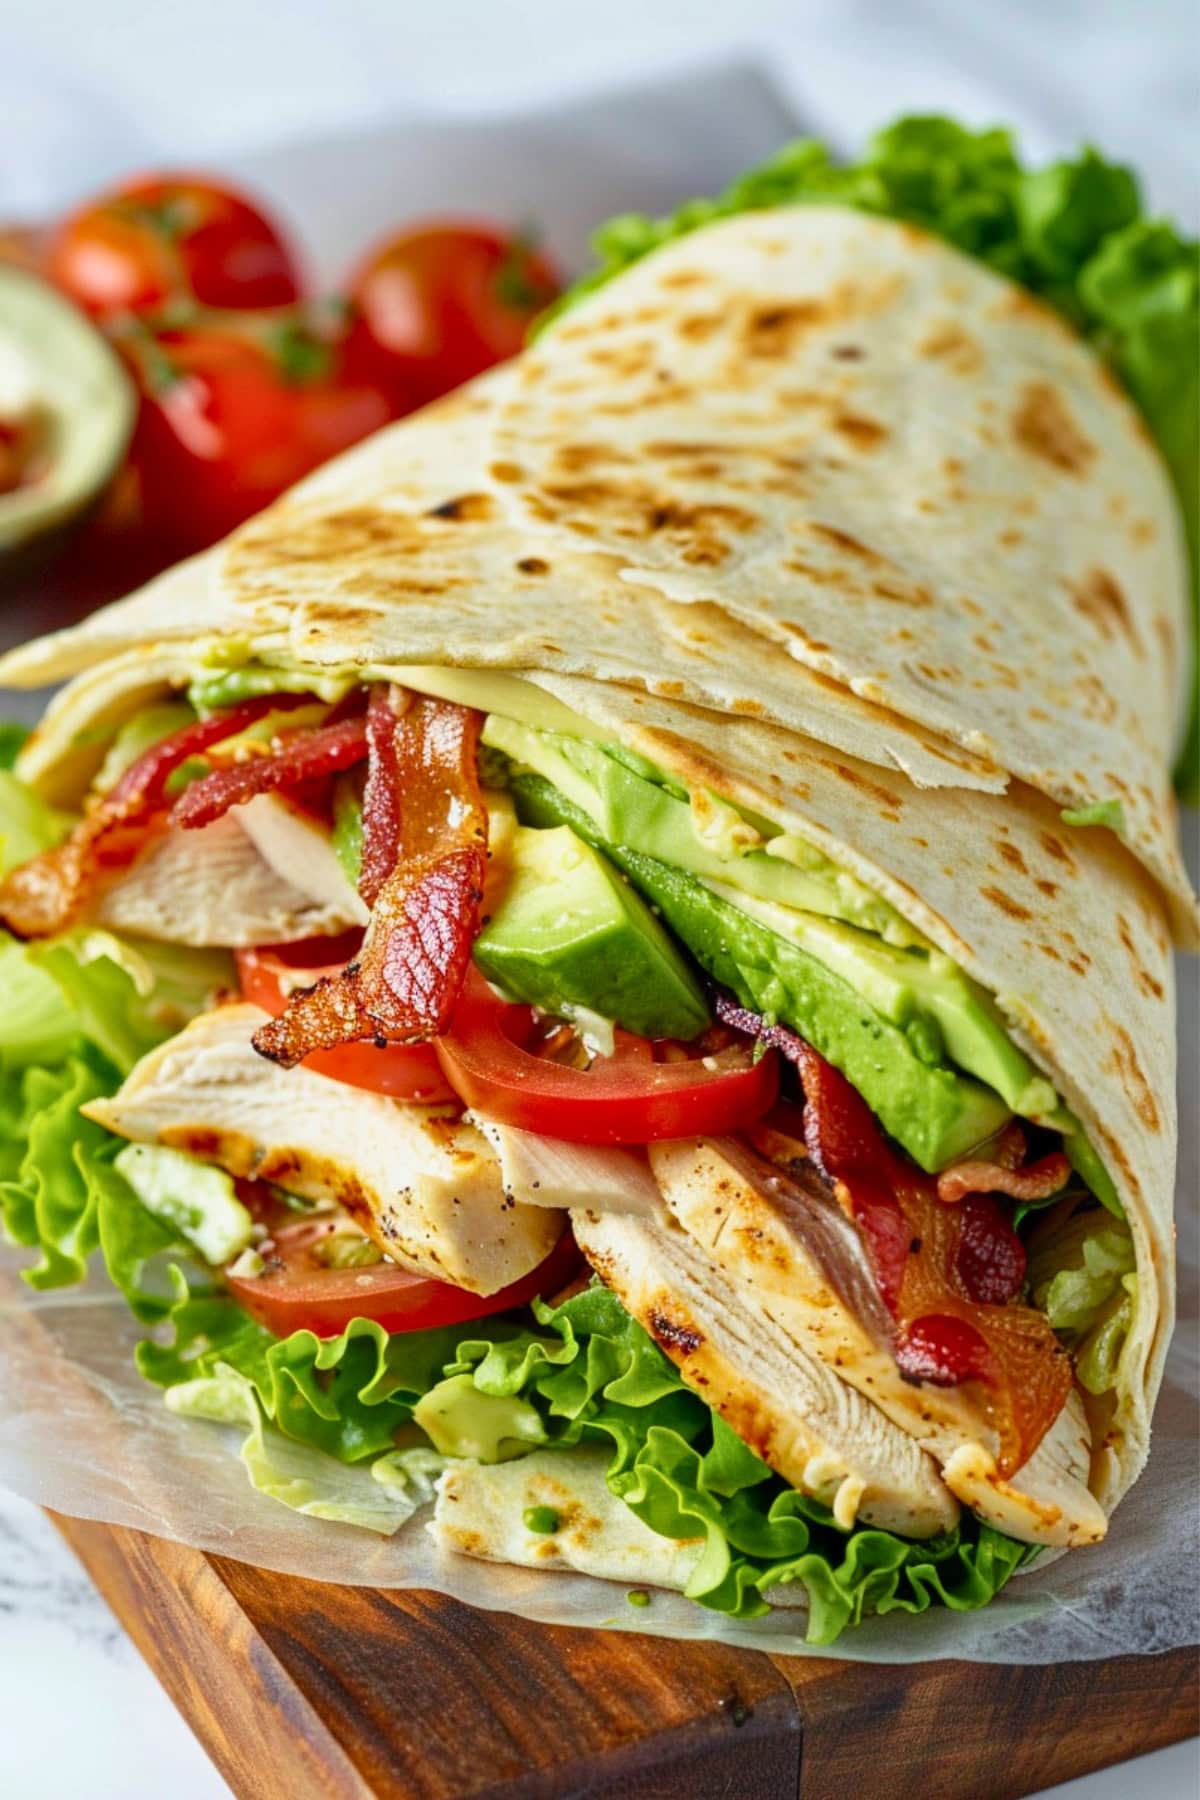 Tortilla wrap made with thinly sliced chicken, crisp lettuce, ripe avocado, juicy tomatoes, and crispy bacon in a soft tortilla wrap.